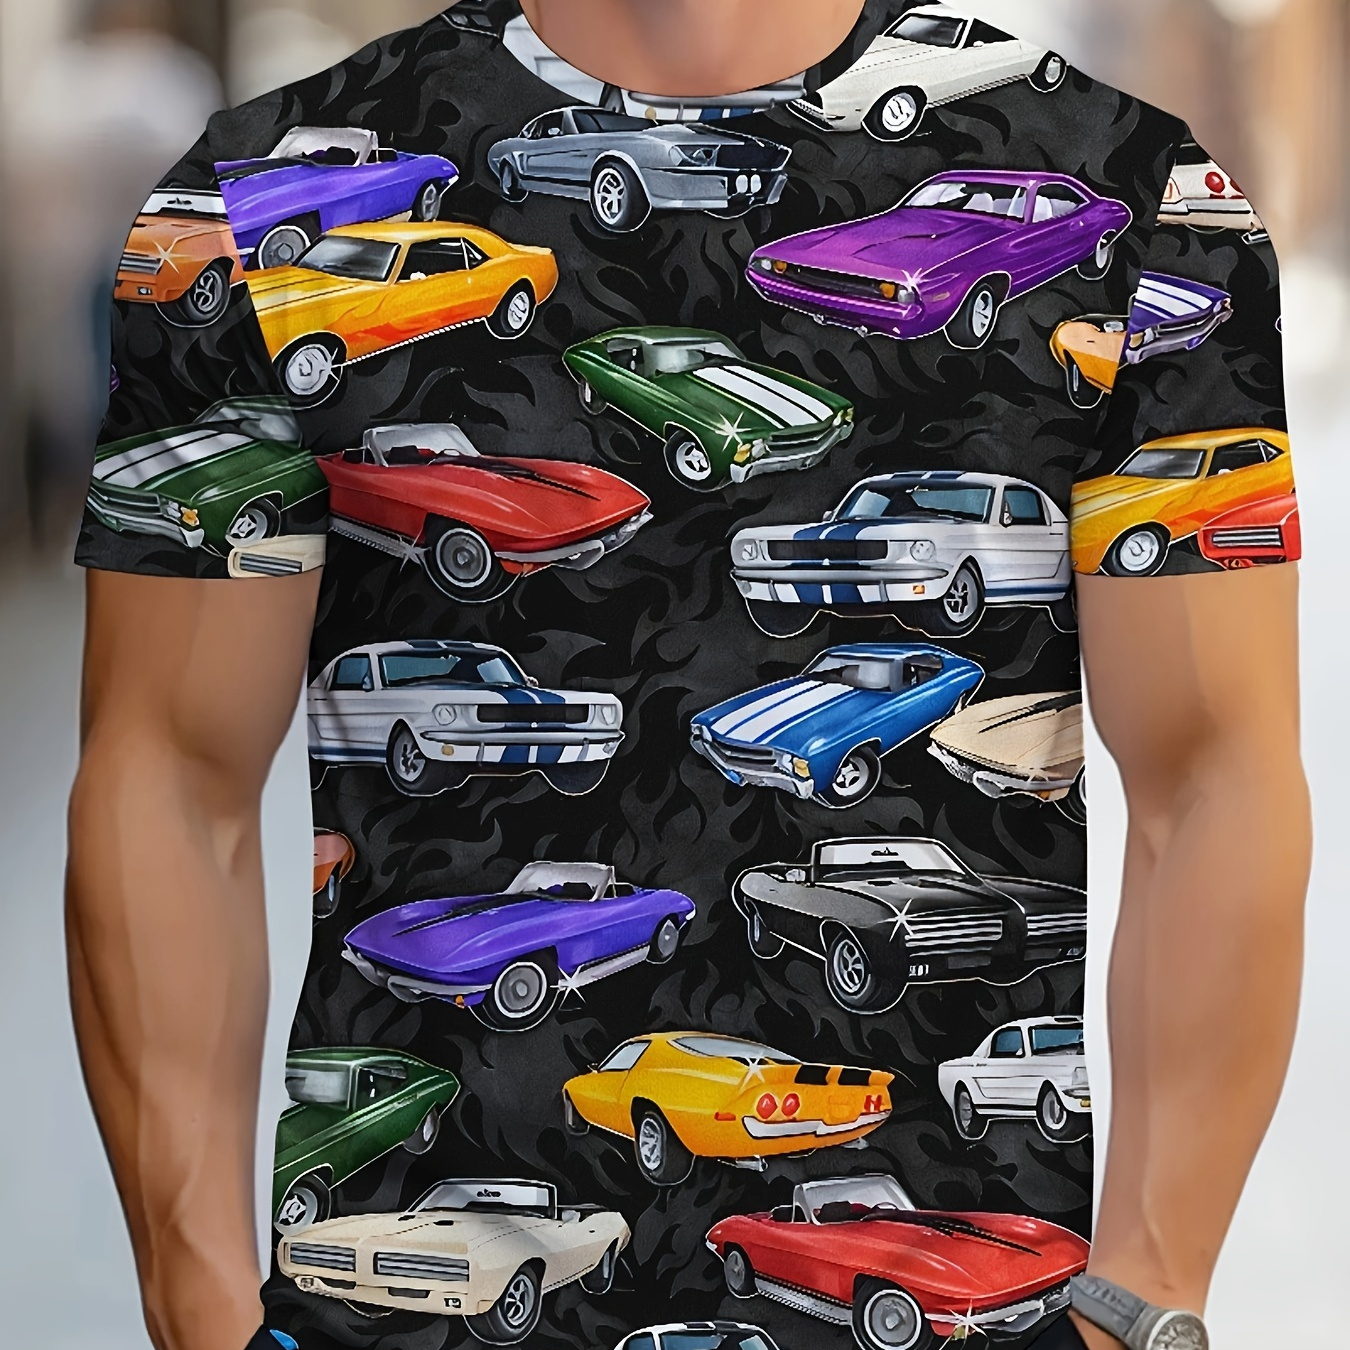 

Men's Cars Graphic Print T-shirt, Short Sleeve Crew Neck Tee, Men's Clothing For Summer Outdoor